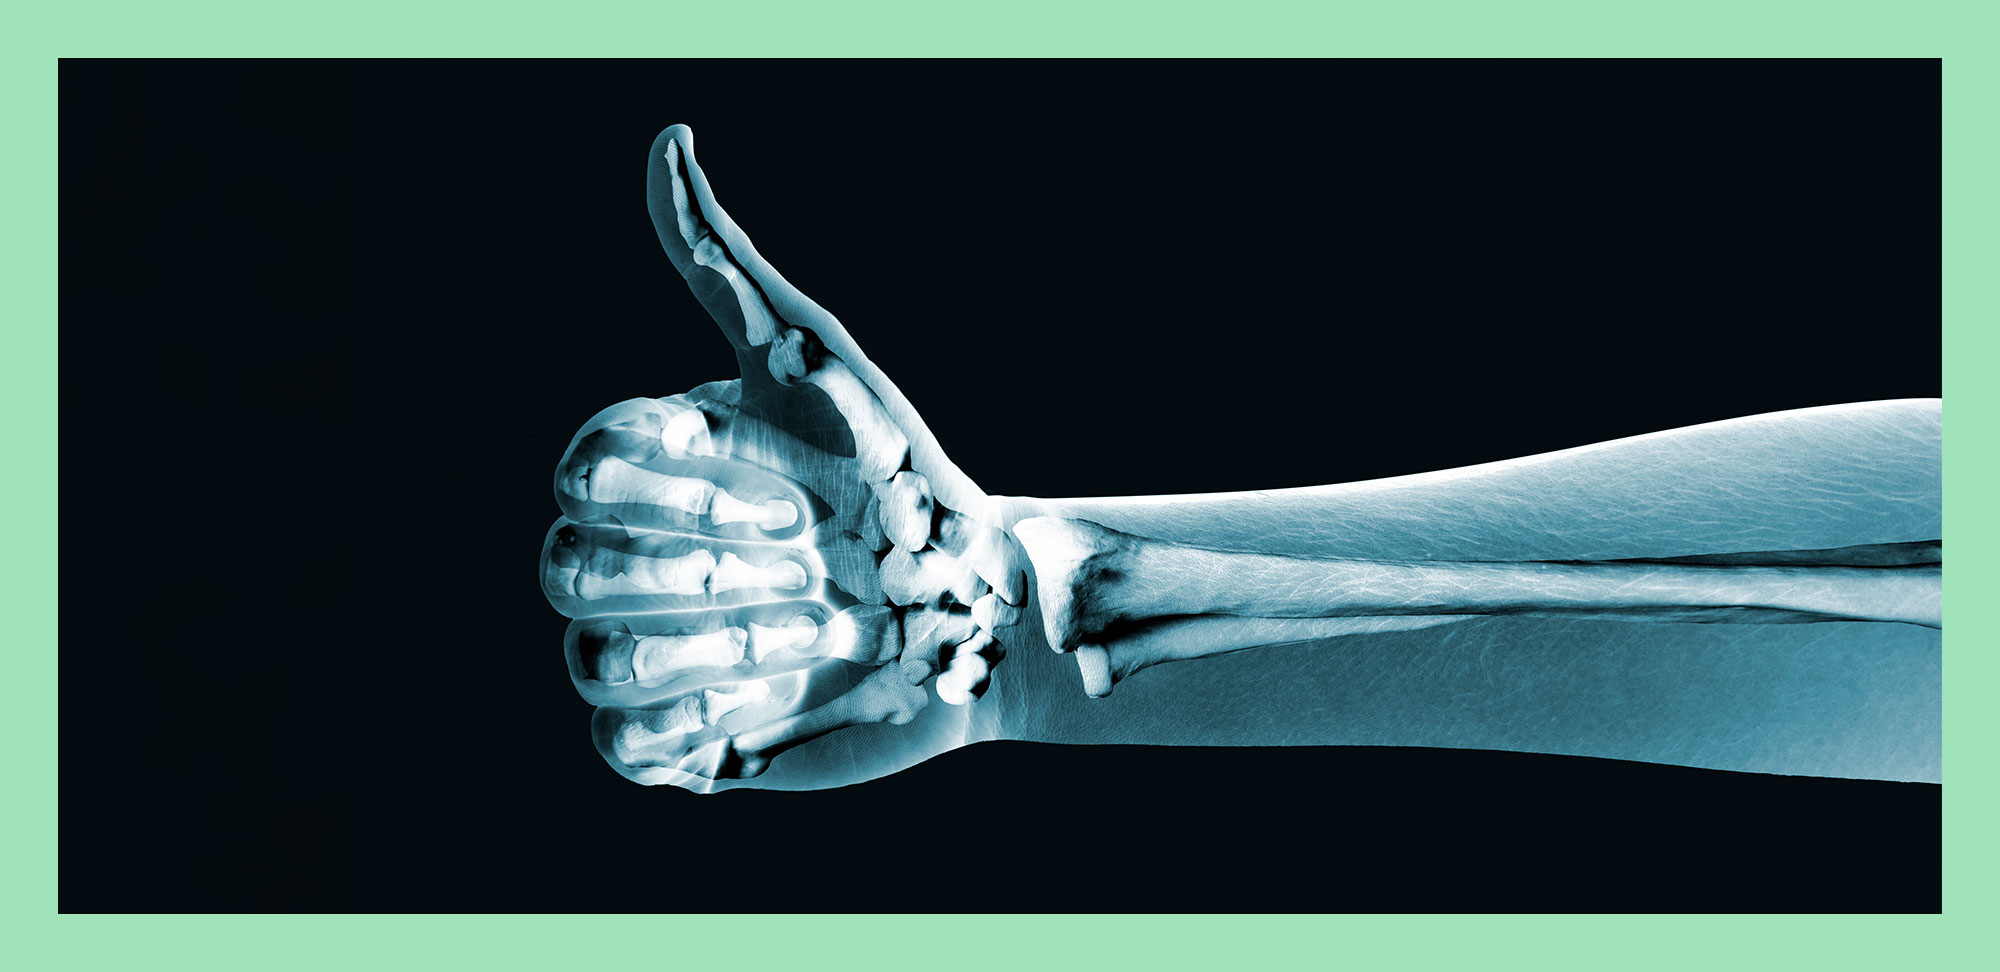 Photo of x-ray hand on black background